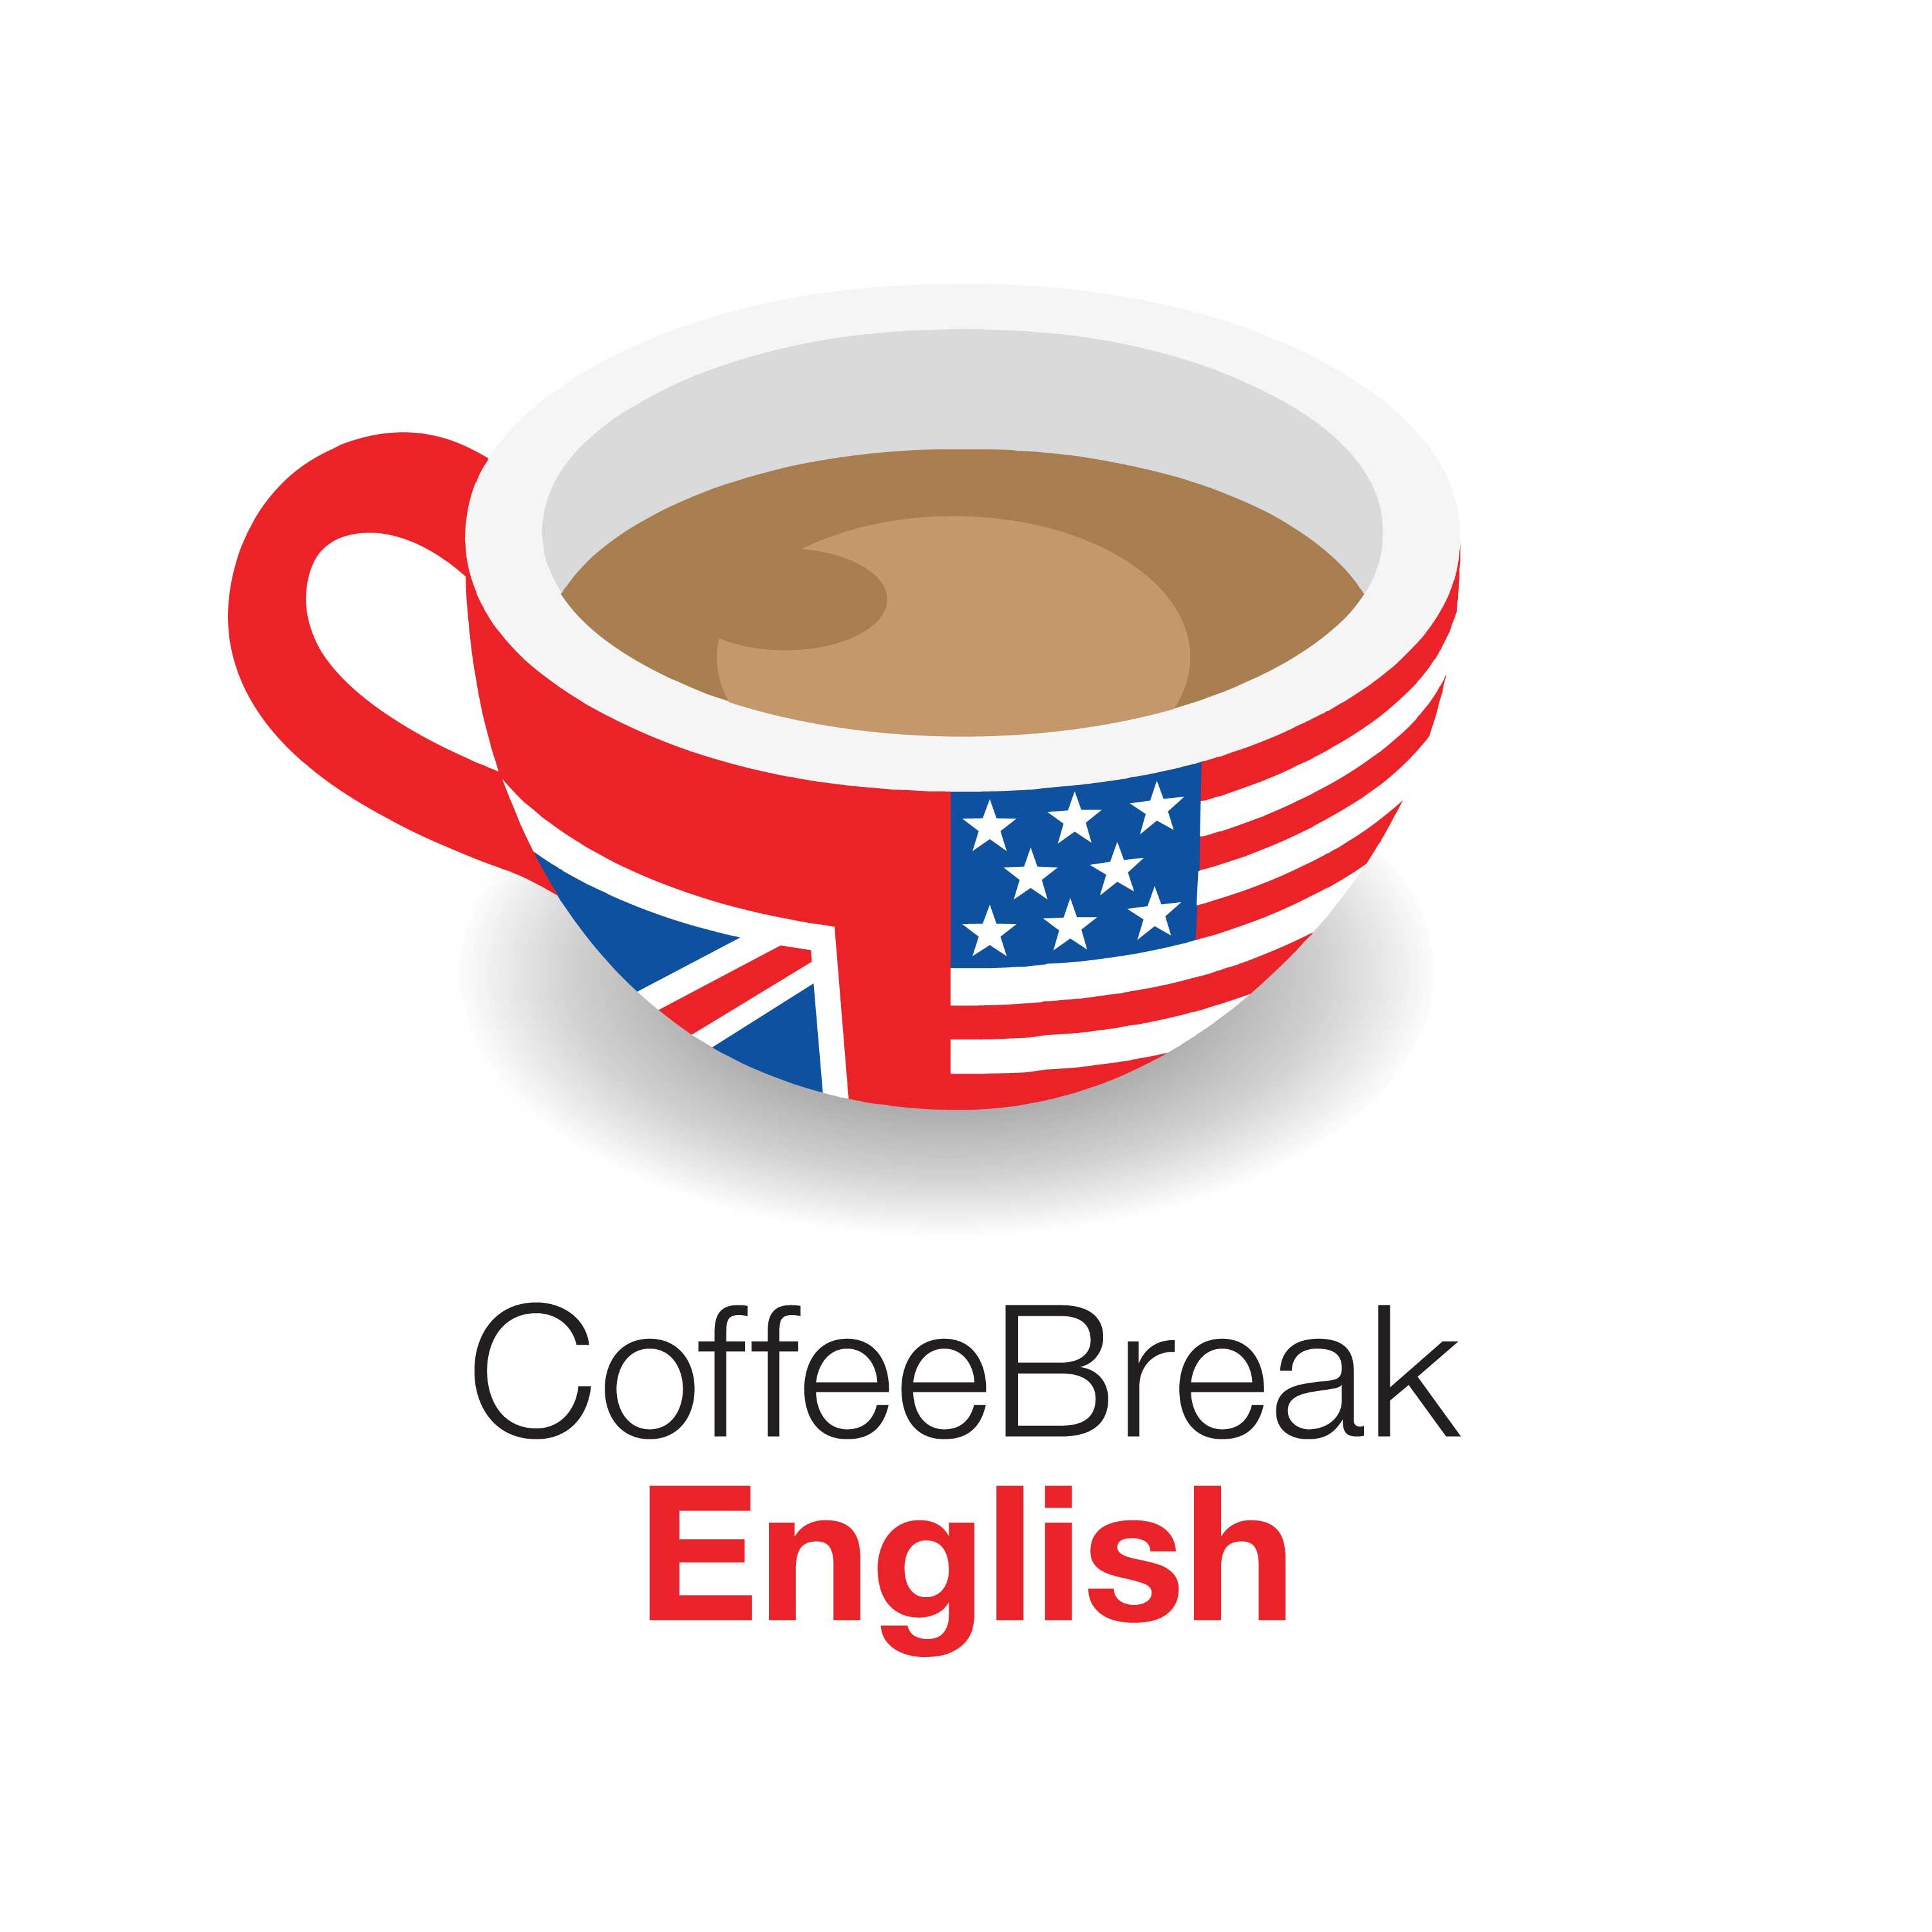 CBE 1.09 | It’s tea time - Britain’s favourite drink and gerund and infinitive forms